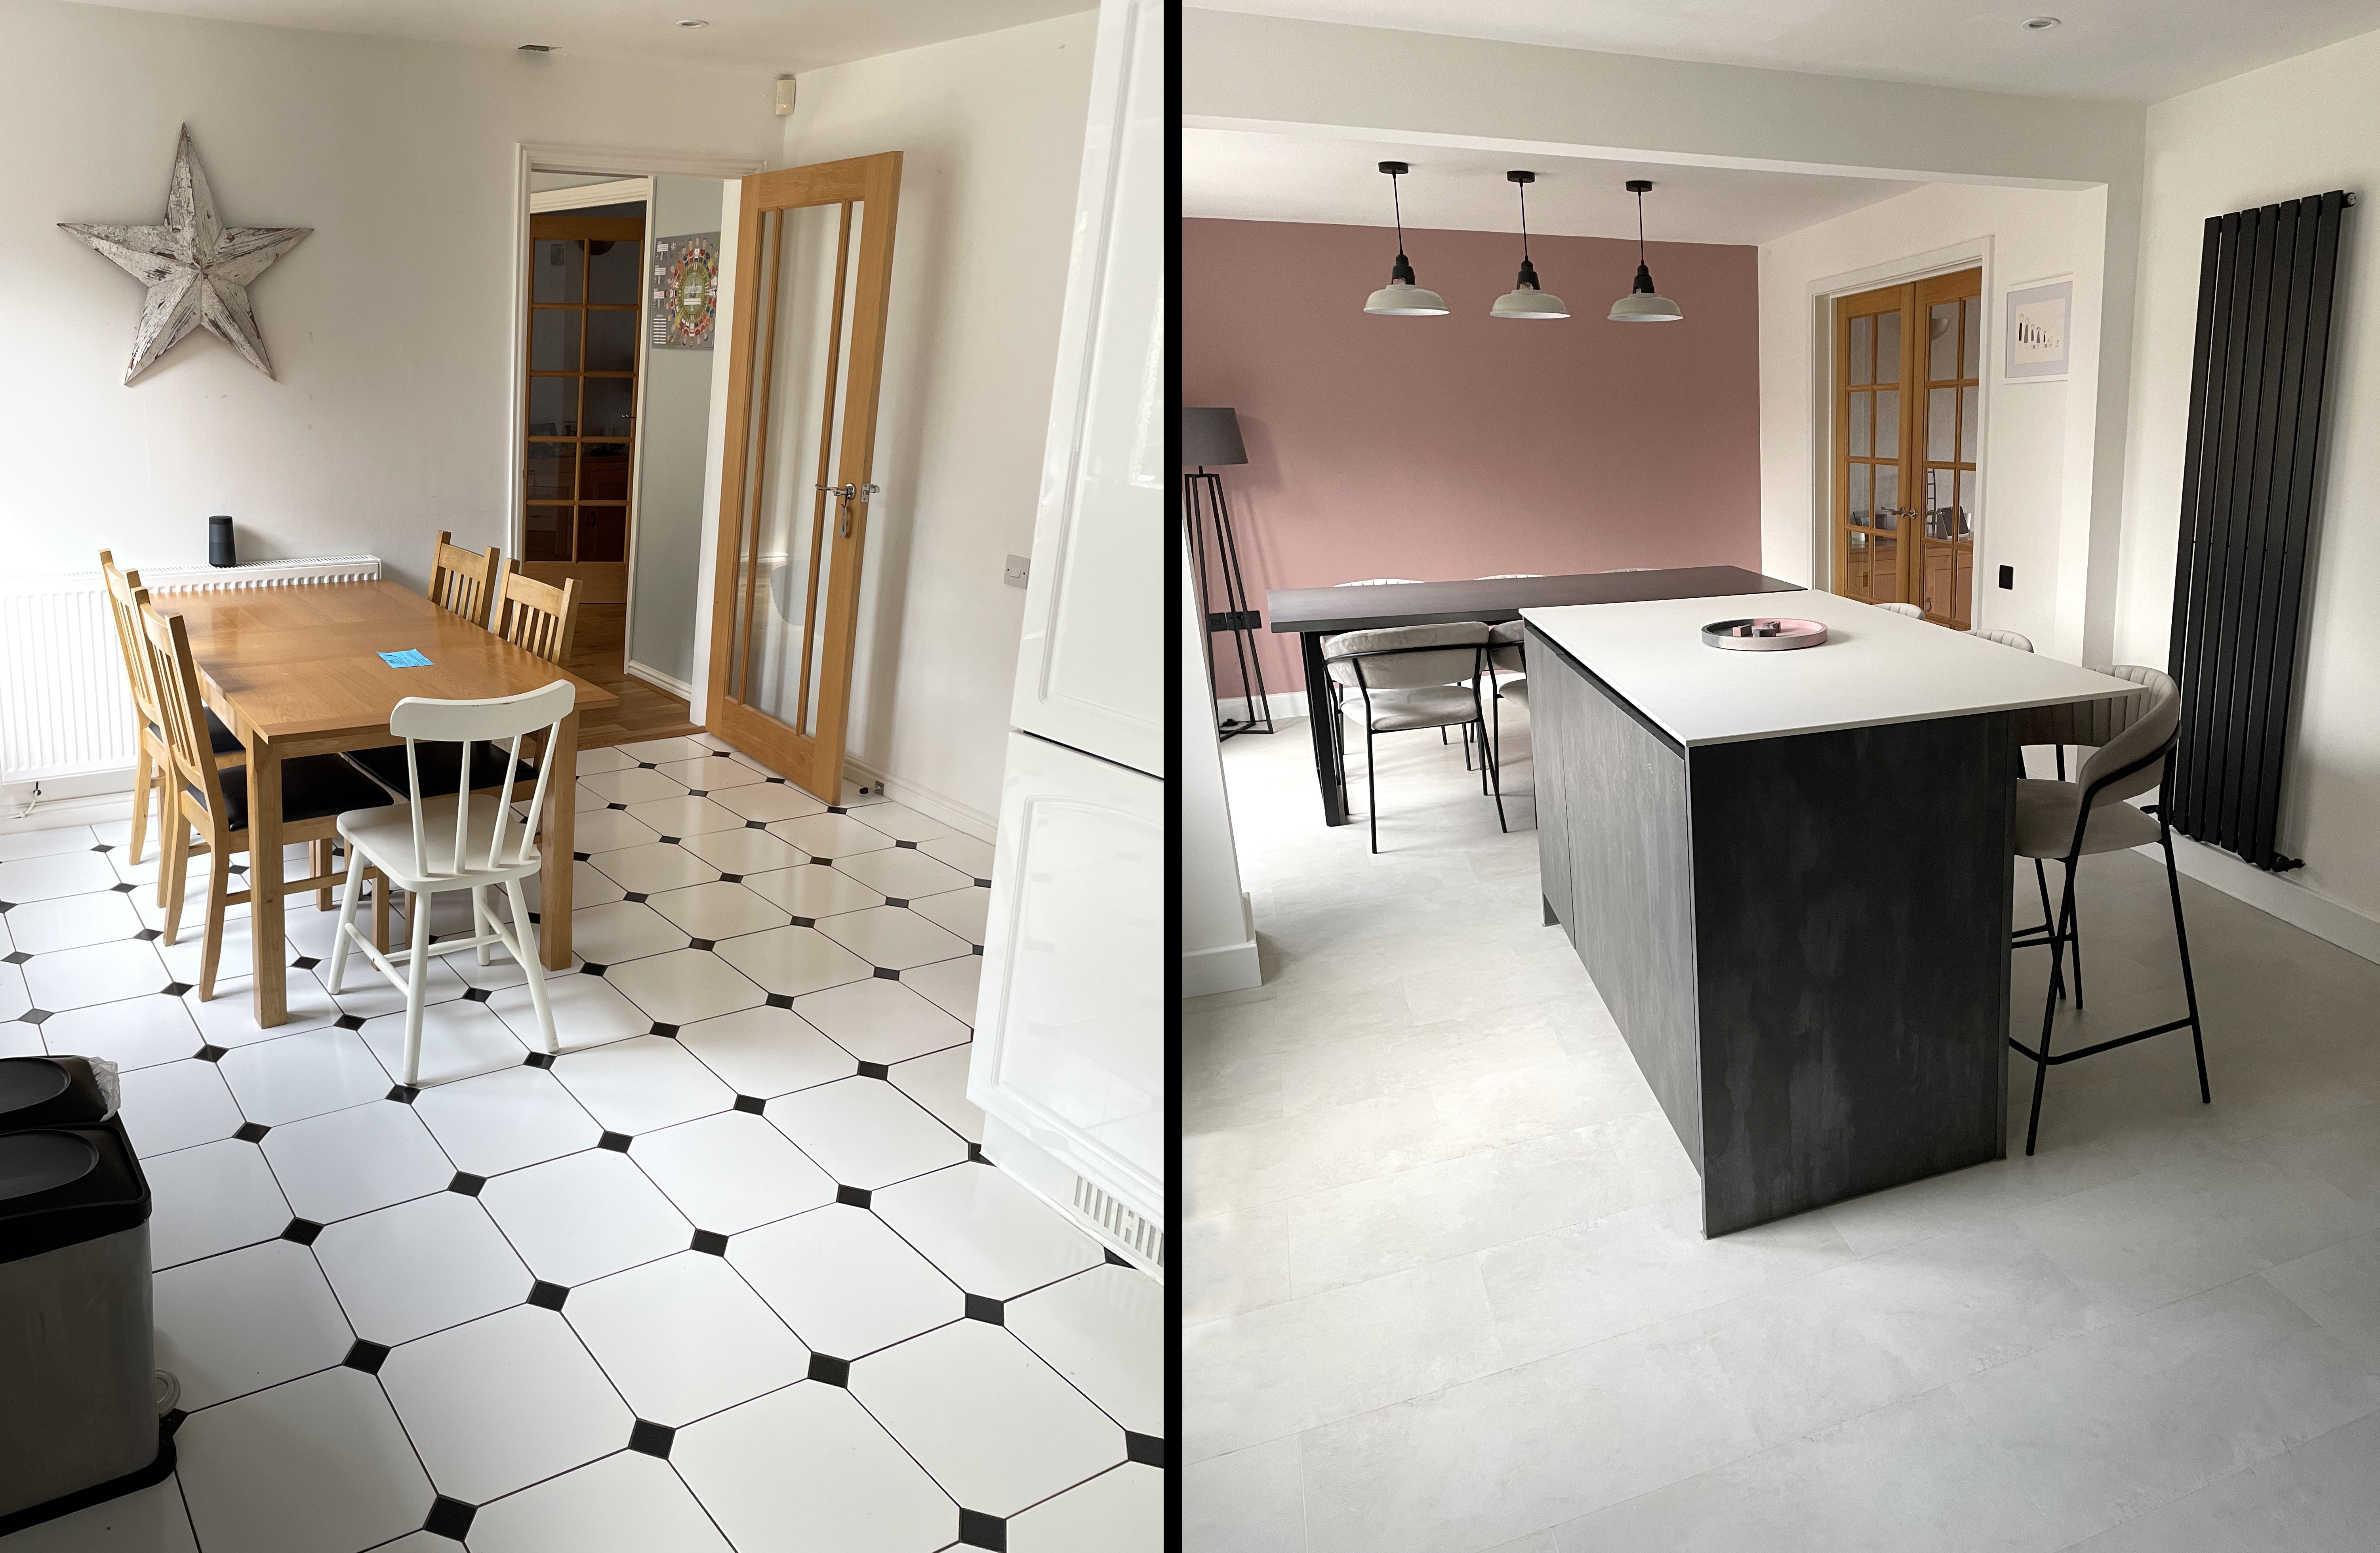 Contemporary style kitchen & dining space with two tone cabinets in Daventry 7